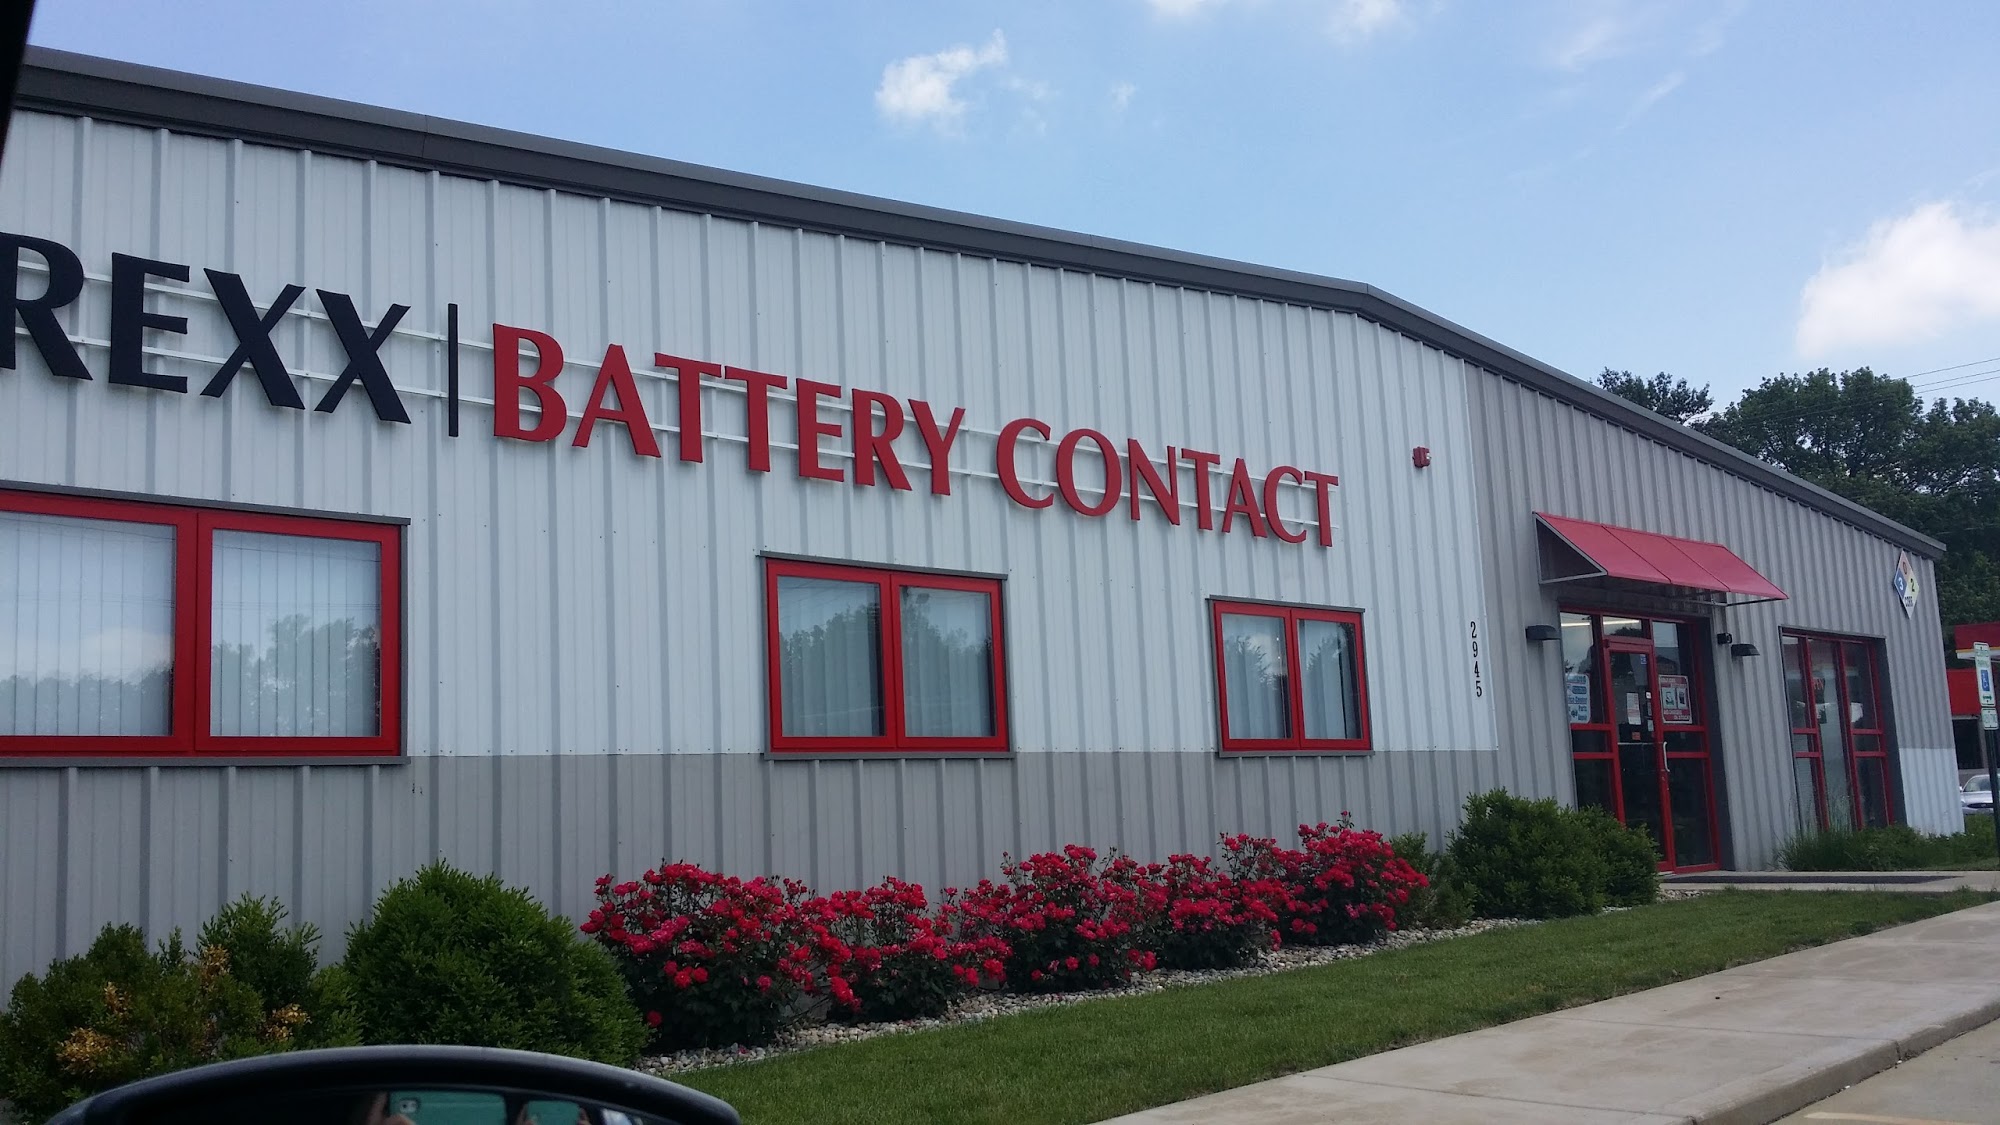 Rexx Battery Company & Battery Contact, Inc.